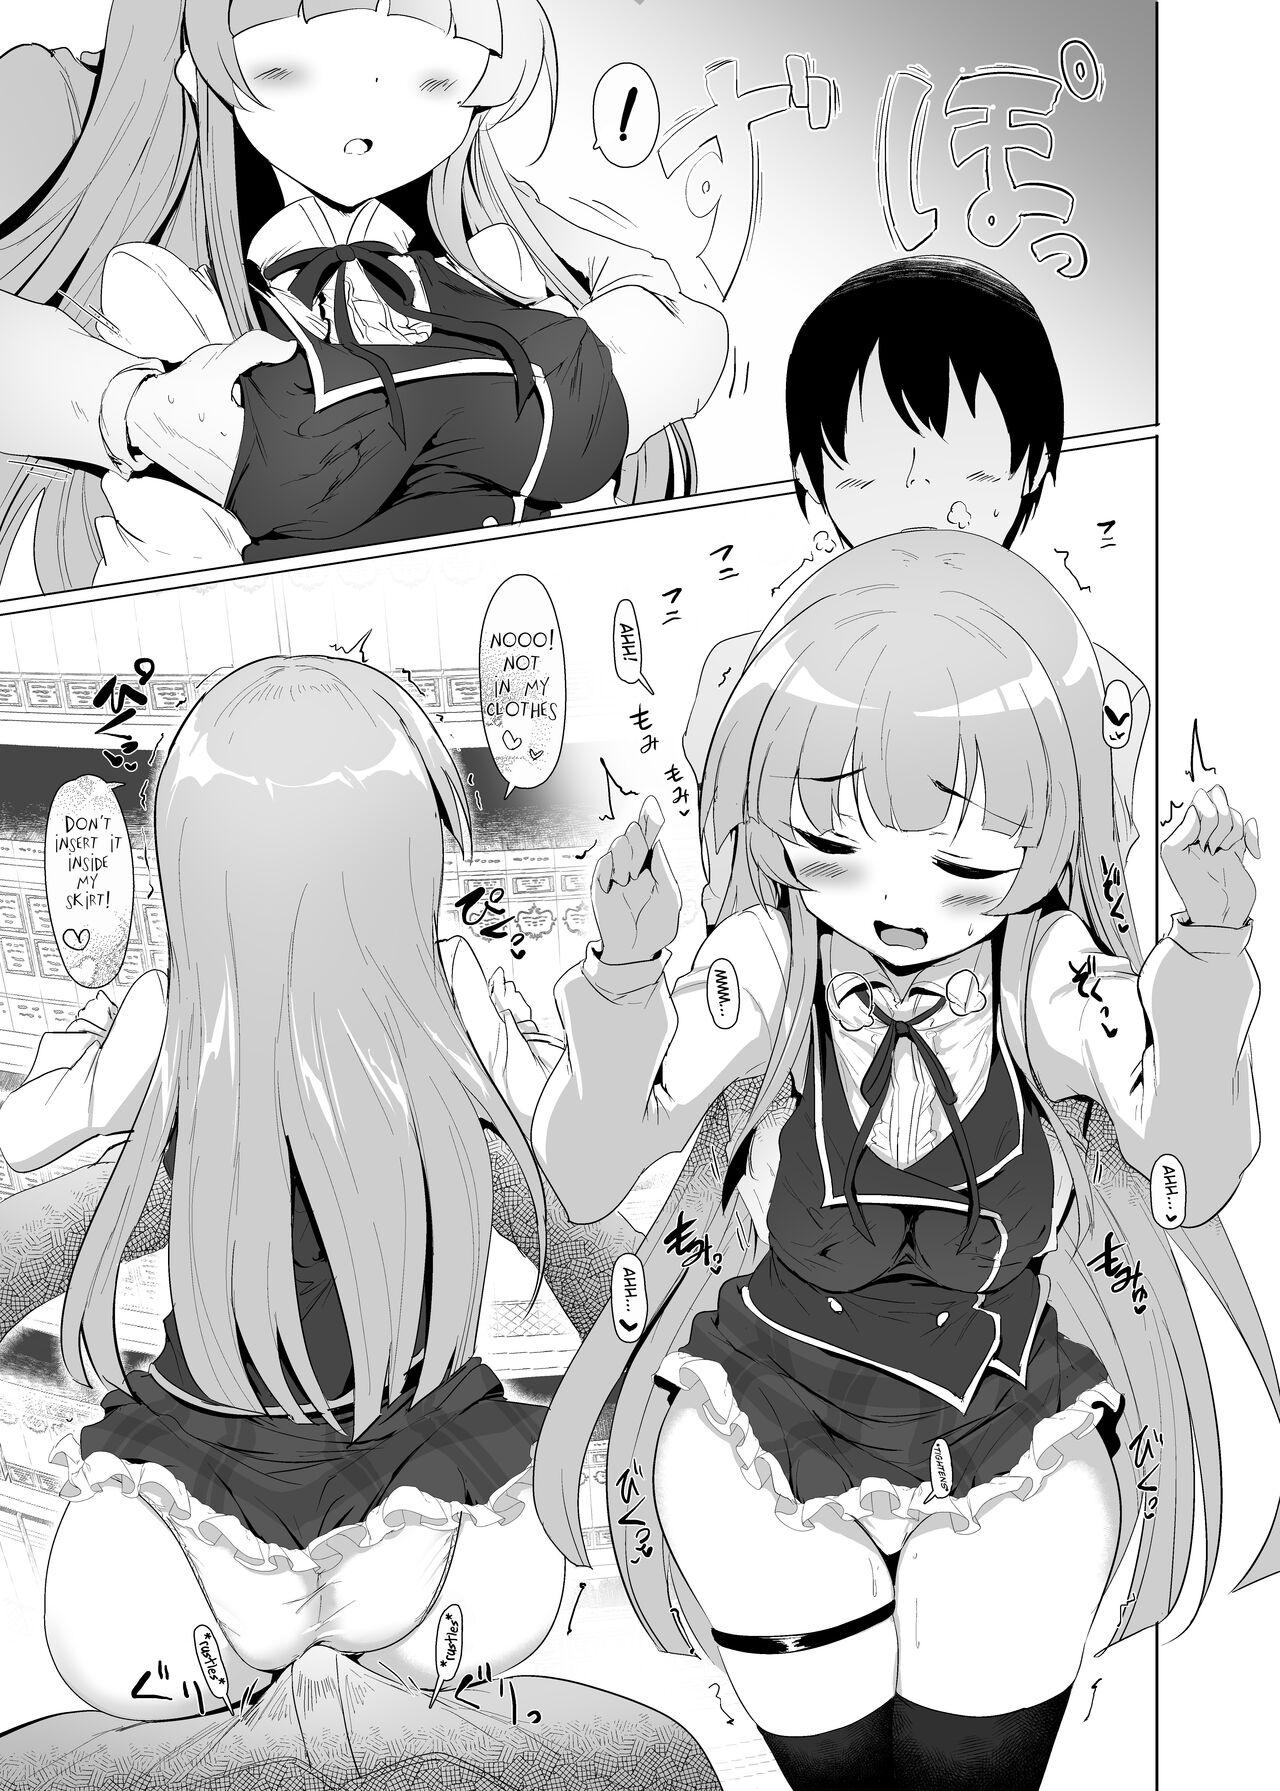 Tits There's No Way An Ecchi Event Will Happen Between Me and the Princess of Manaria Kingdom! 2 - Manaria friends Cocksuckers - Page 11